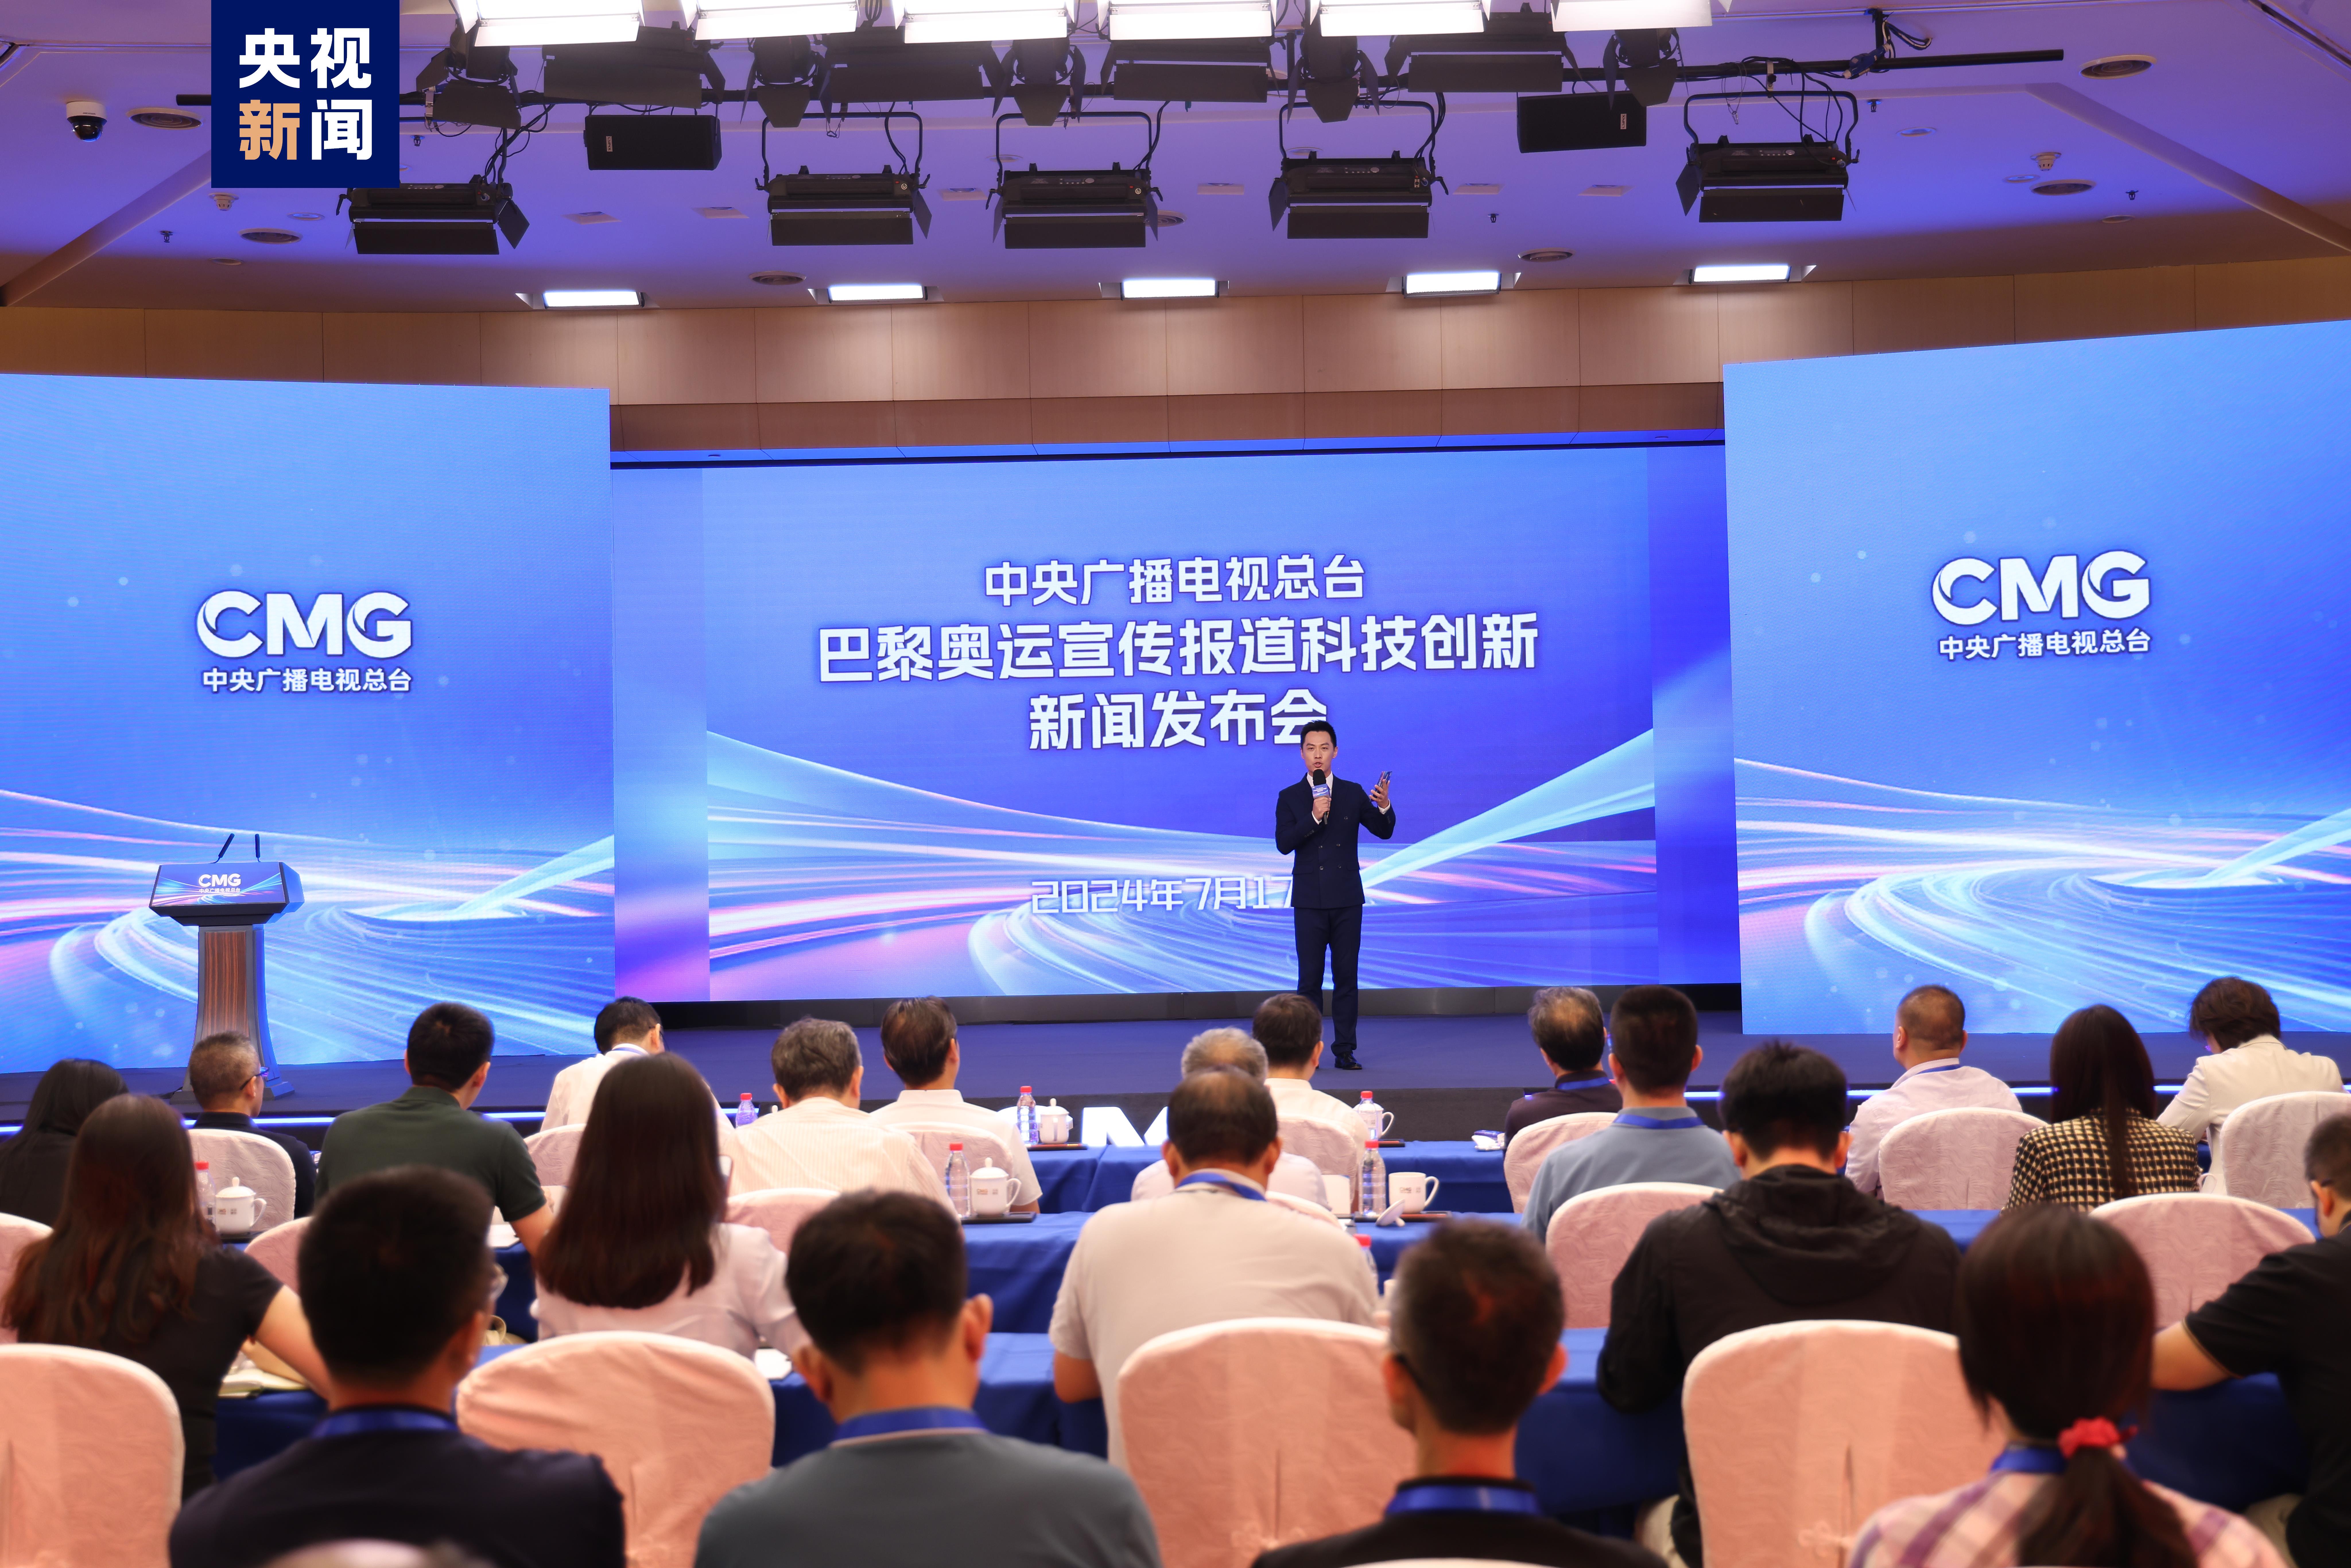 The China Media Group releases the applications for its 10 self-developed technologies for the upcoming 2024 Paris Summer Olympics, July 17, 2024. /CMG